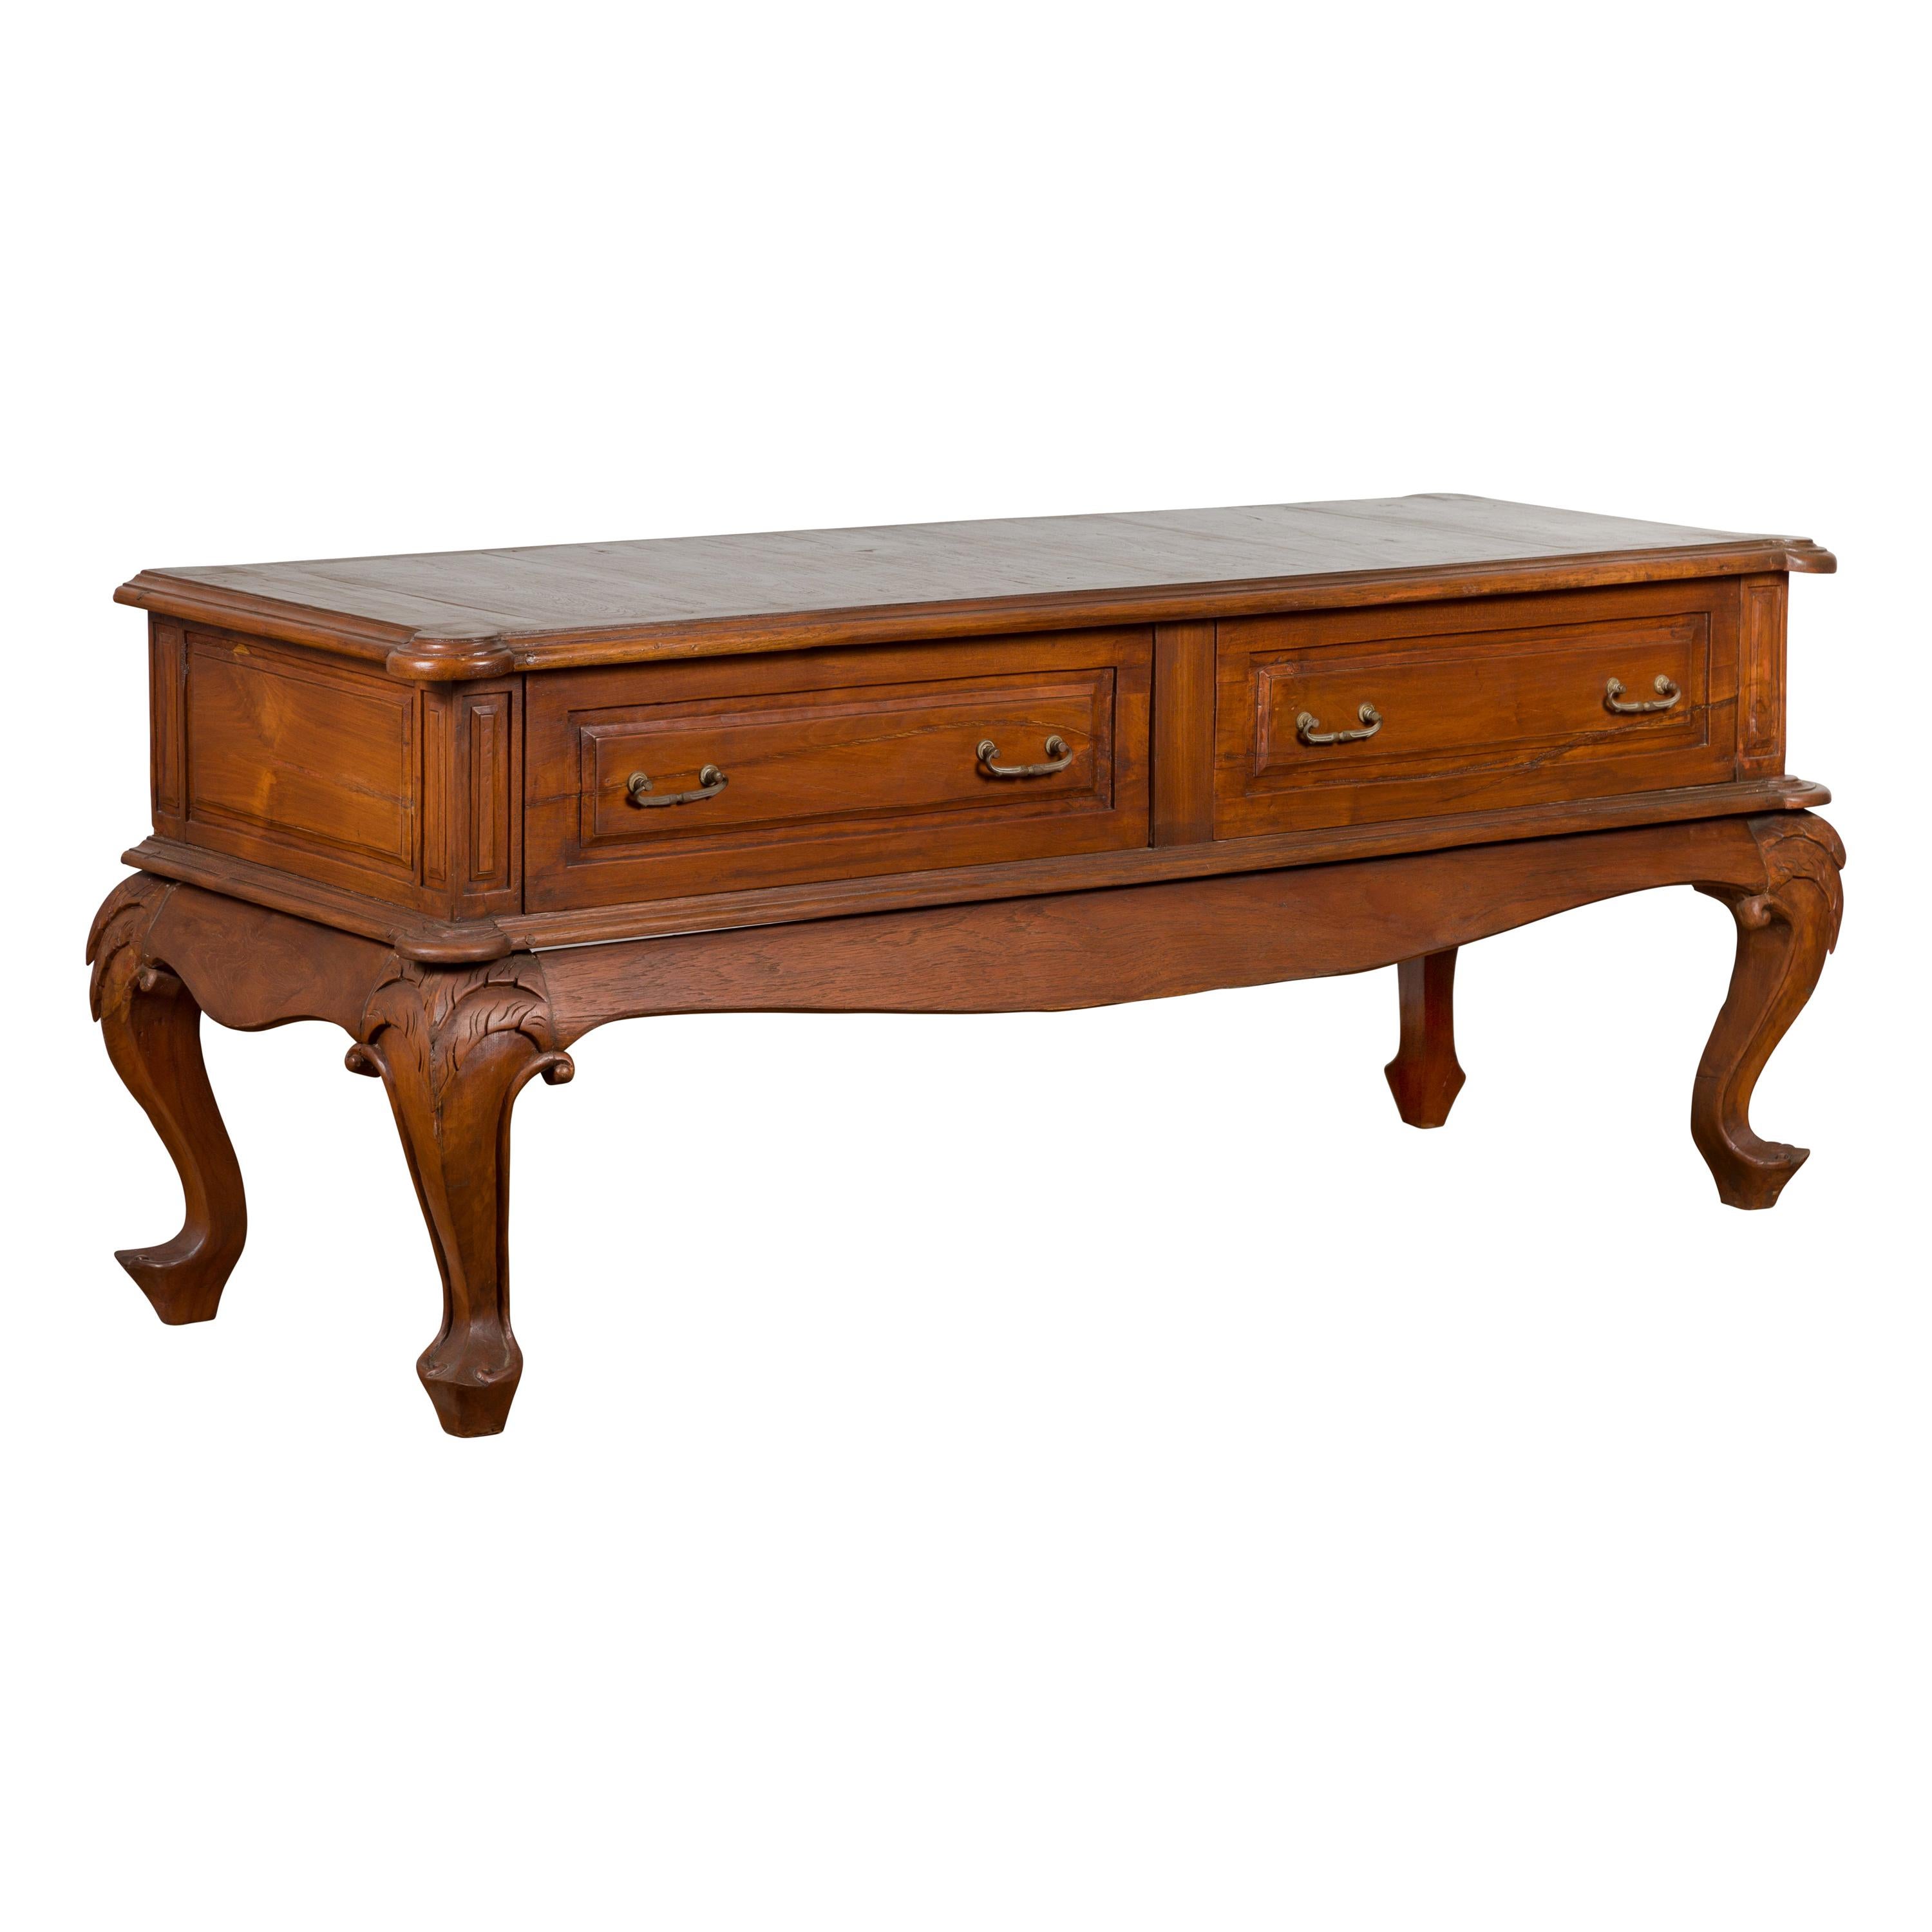 Dutch Colonial Early 20th Century Low Table with Two Drawers and Cabriole Legs For Sale